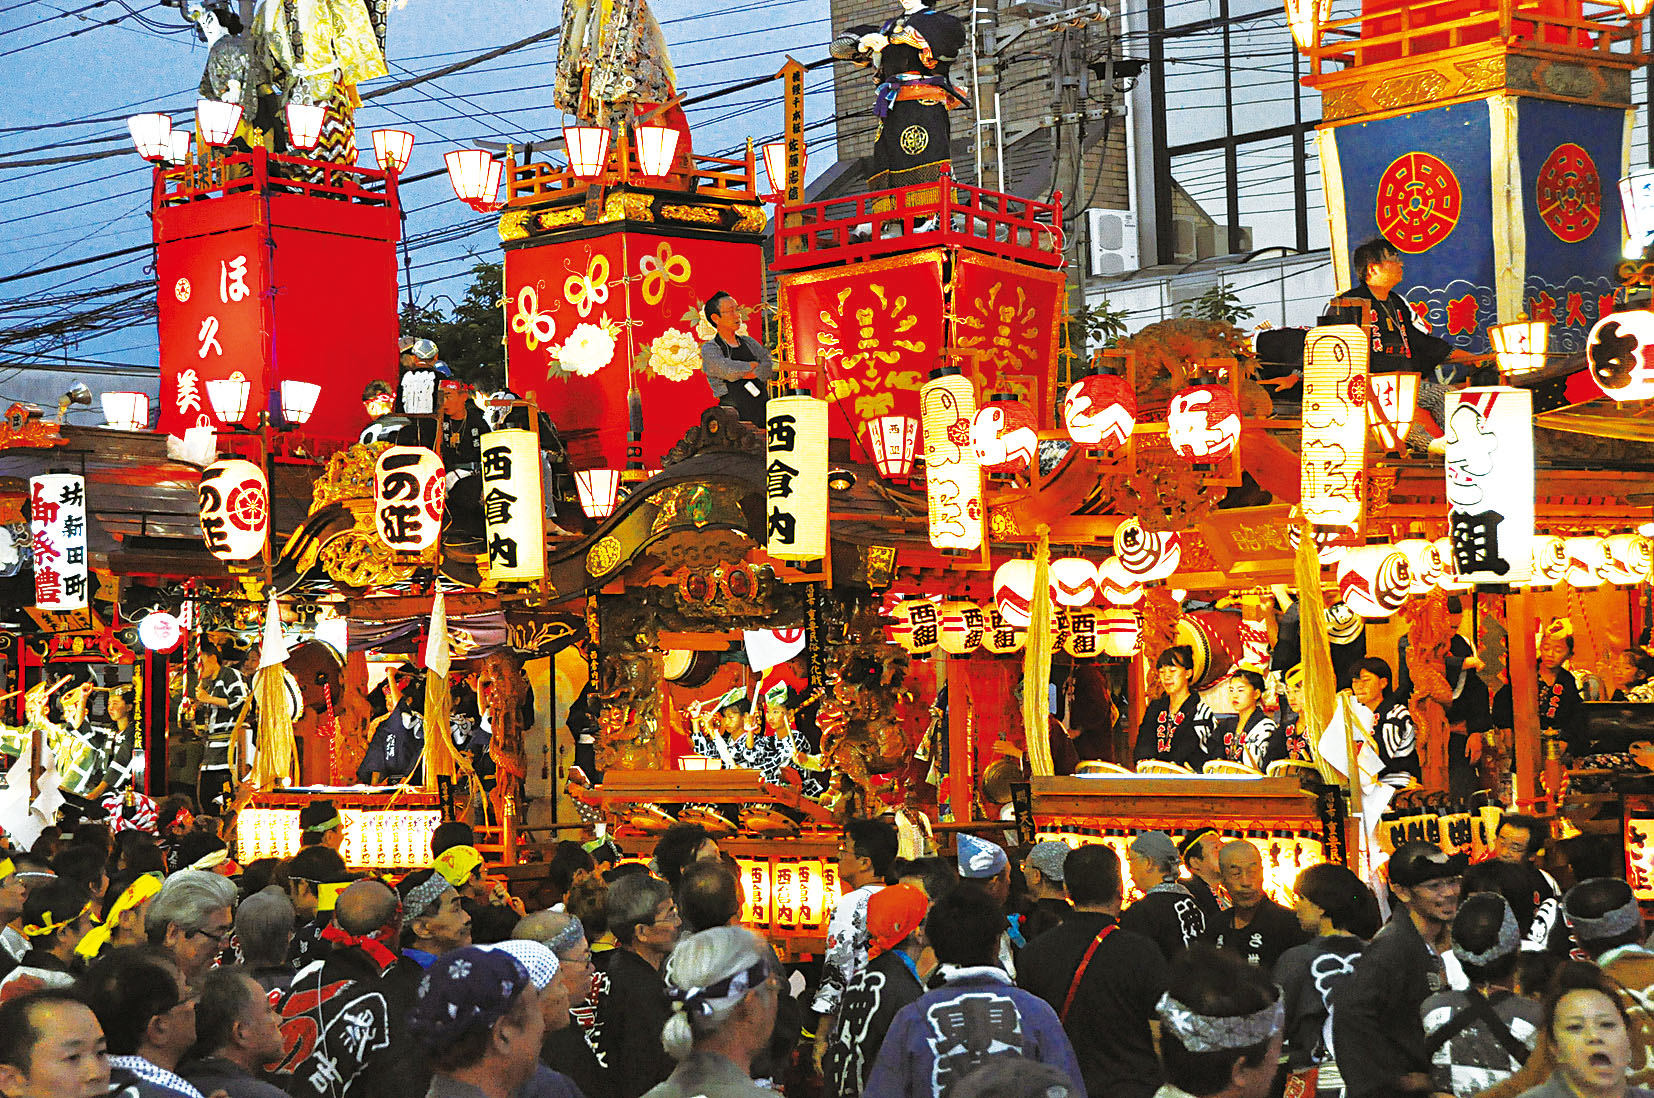 Numata Festival that held for 3 days will gather approximately 200,000. The gorgeous floats are also a must-see event.